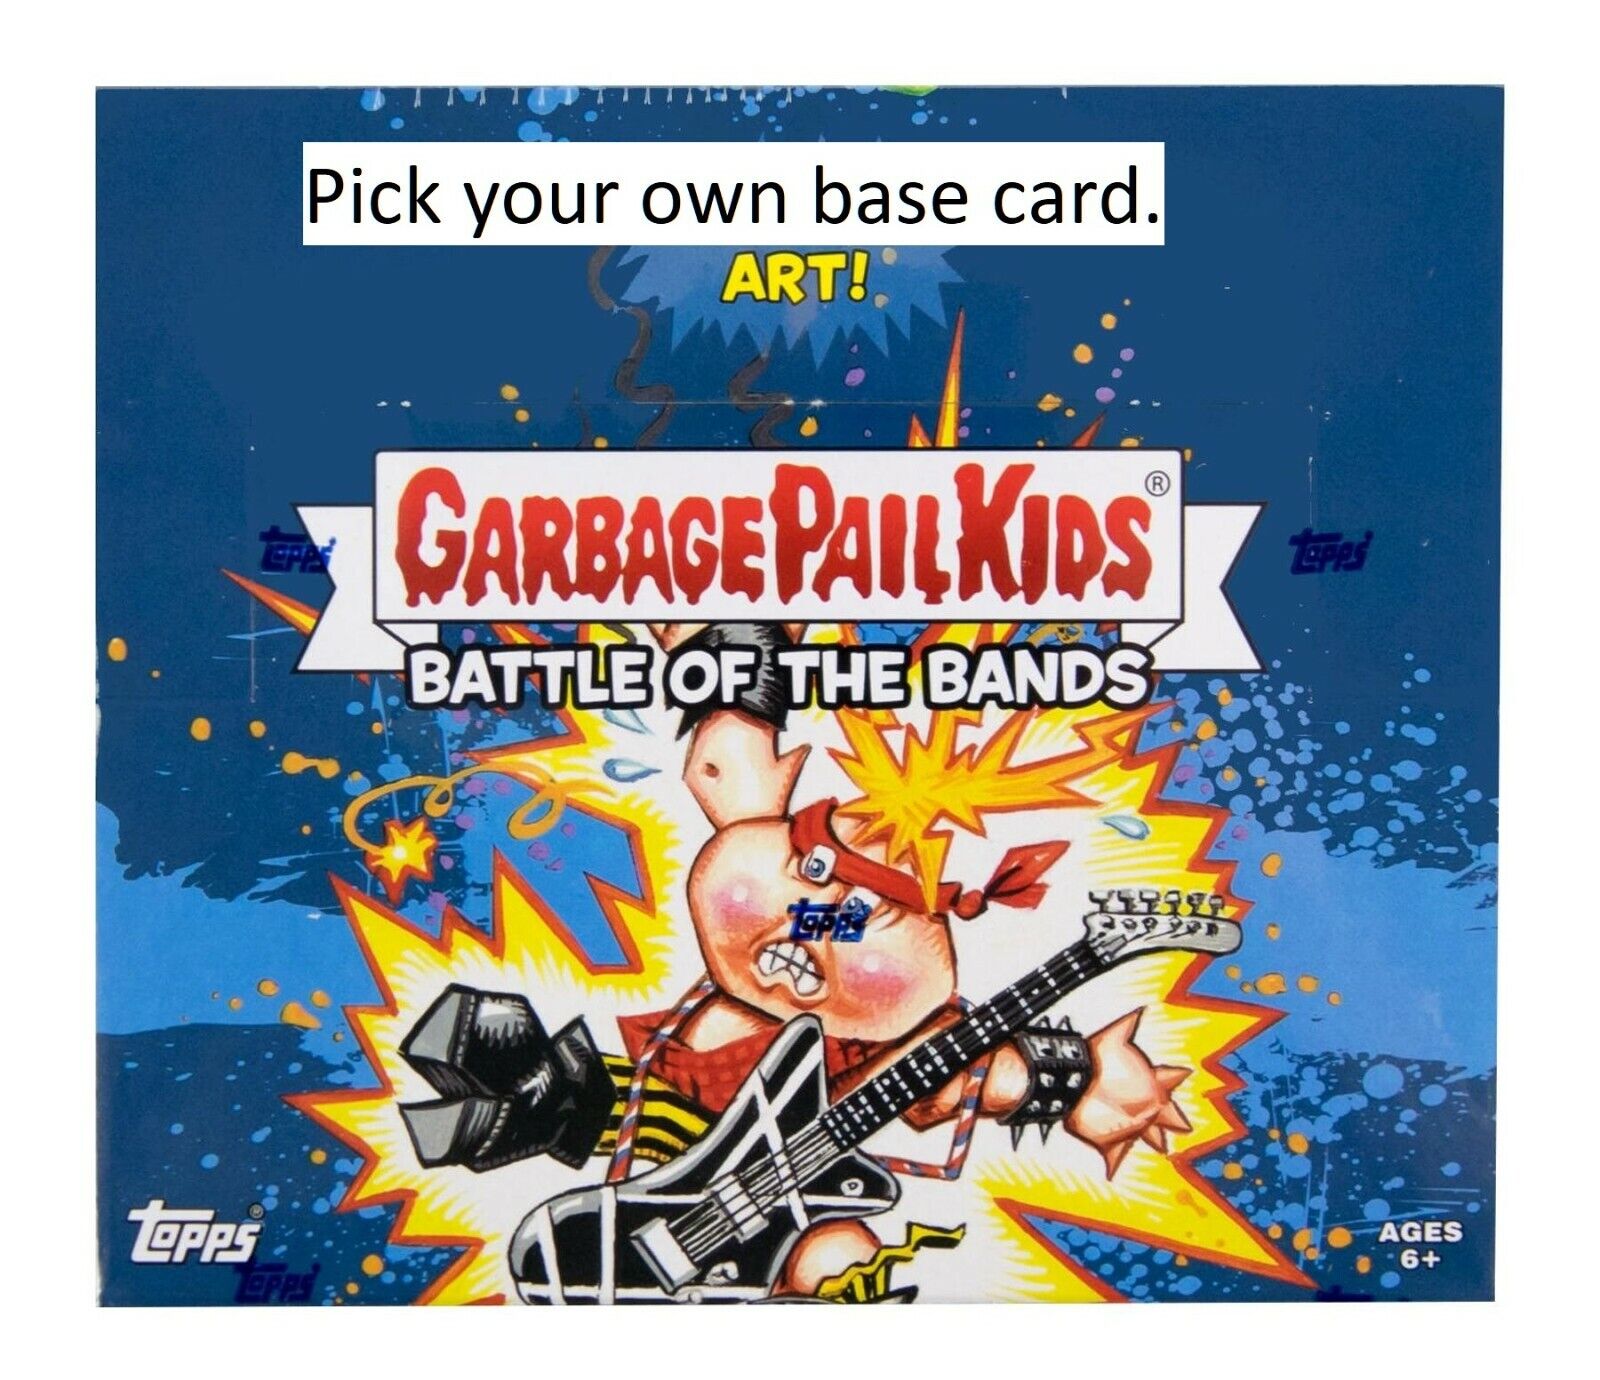 2017 Garbage Pail Kids(GPK) Battle of the Bands - Pick you own Base Card